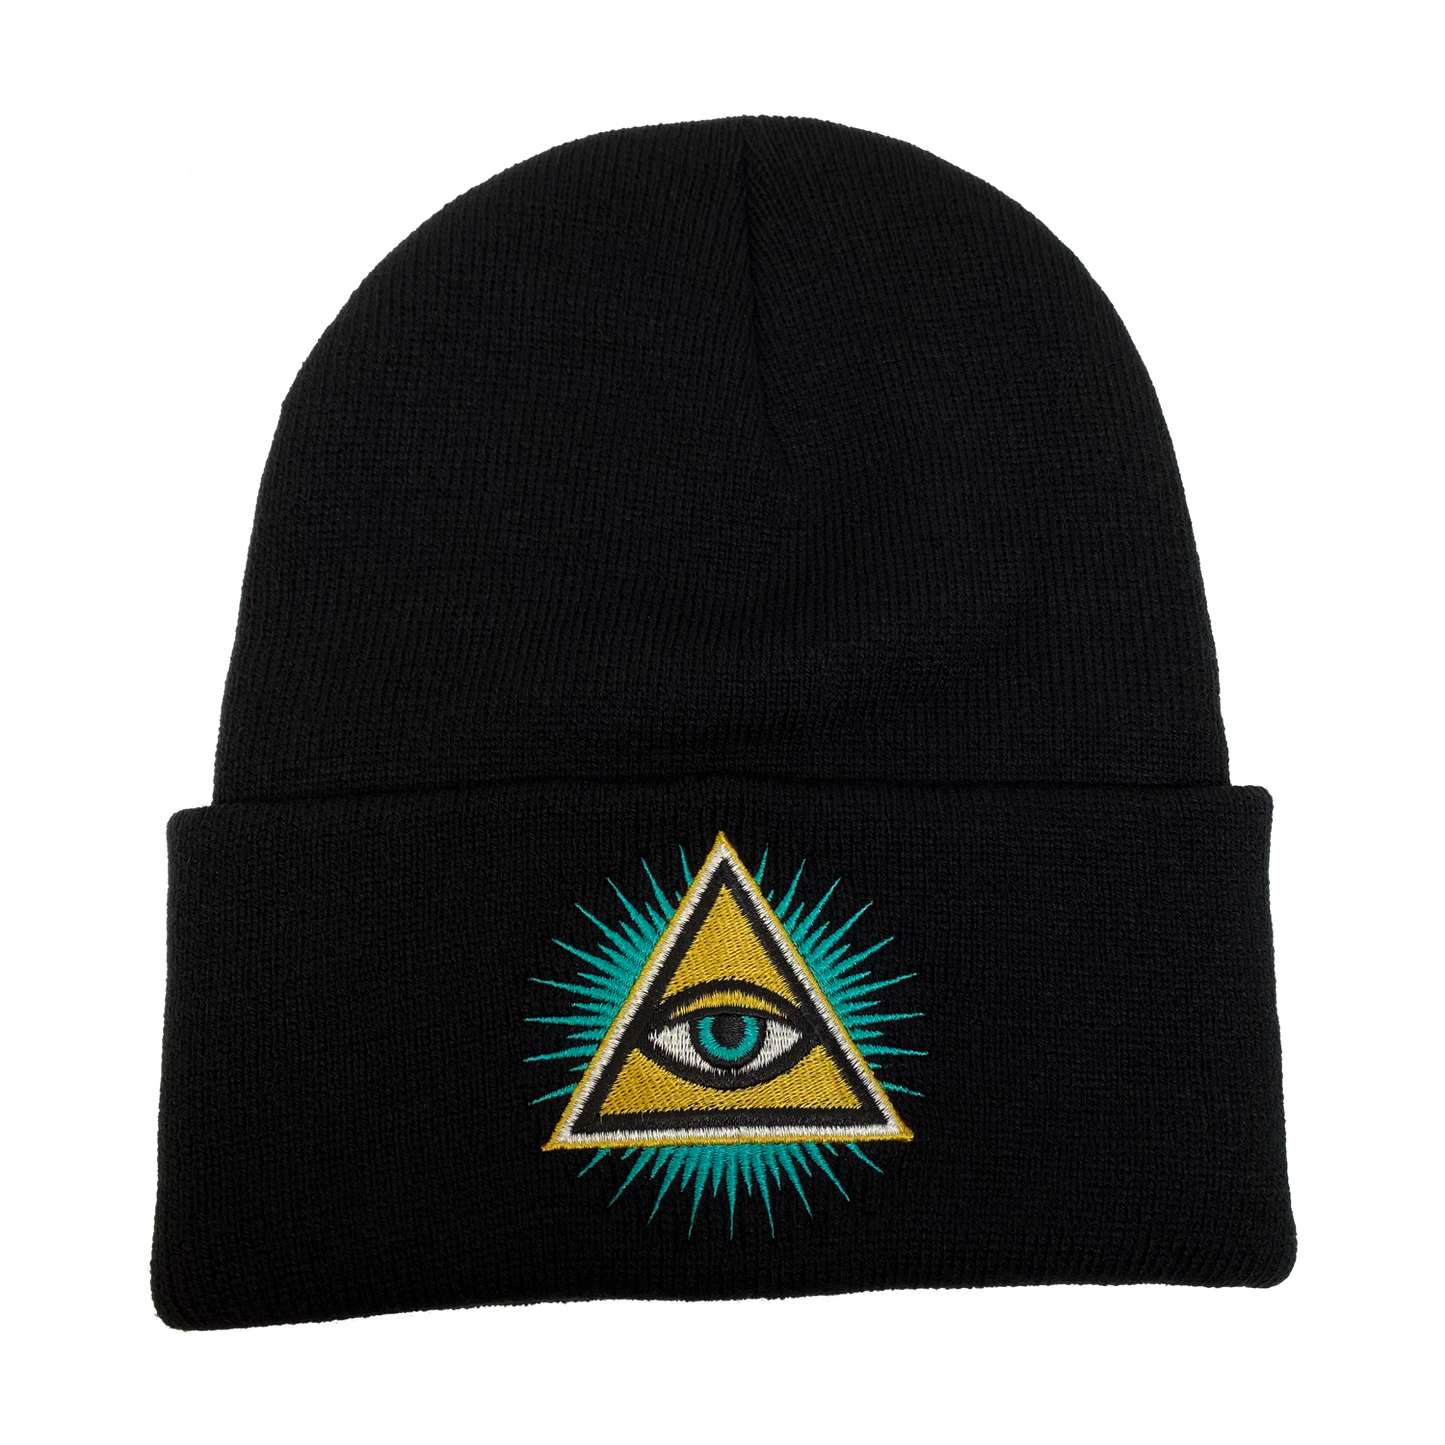 Illuminati Evil Eye Embroidered Beanie - UNMASKED Horror & Punk Patches and Decor